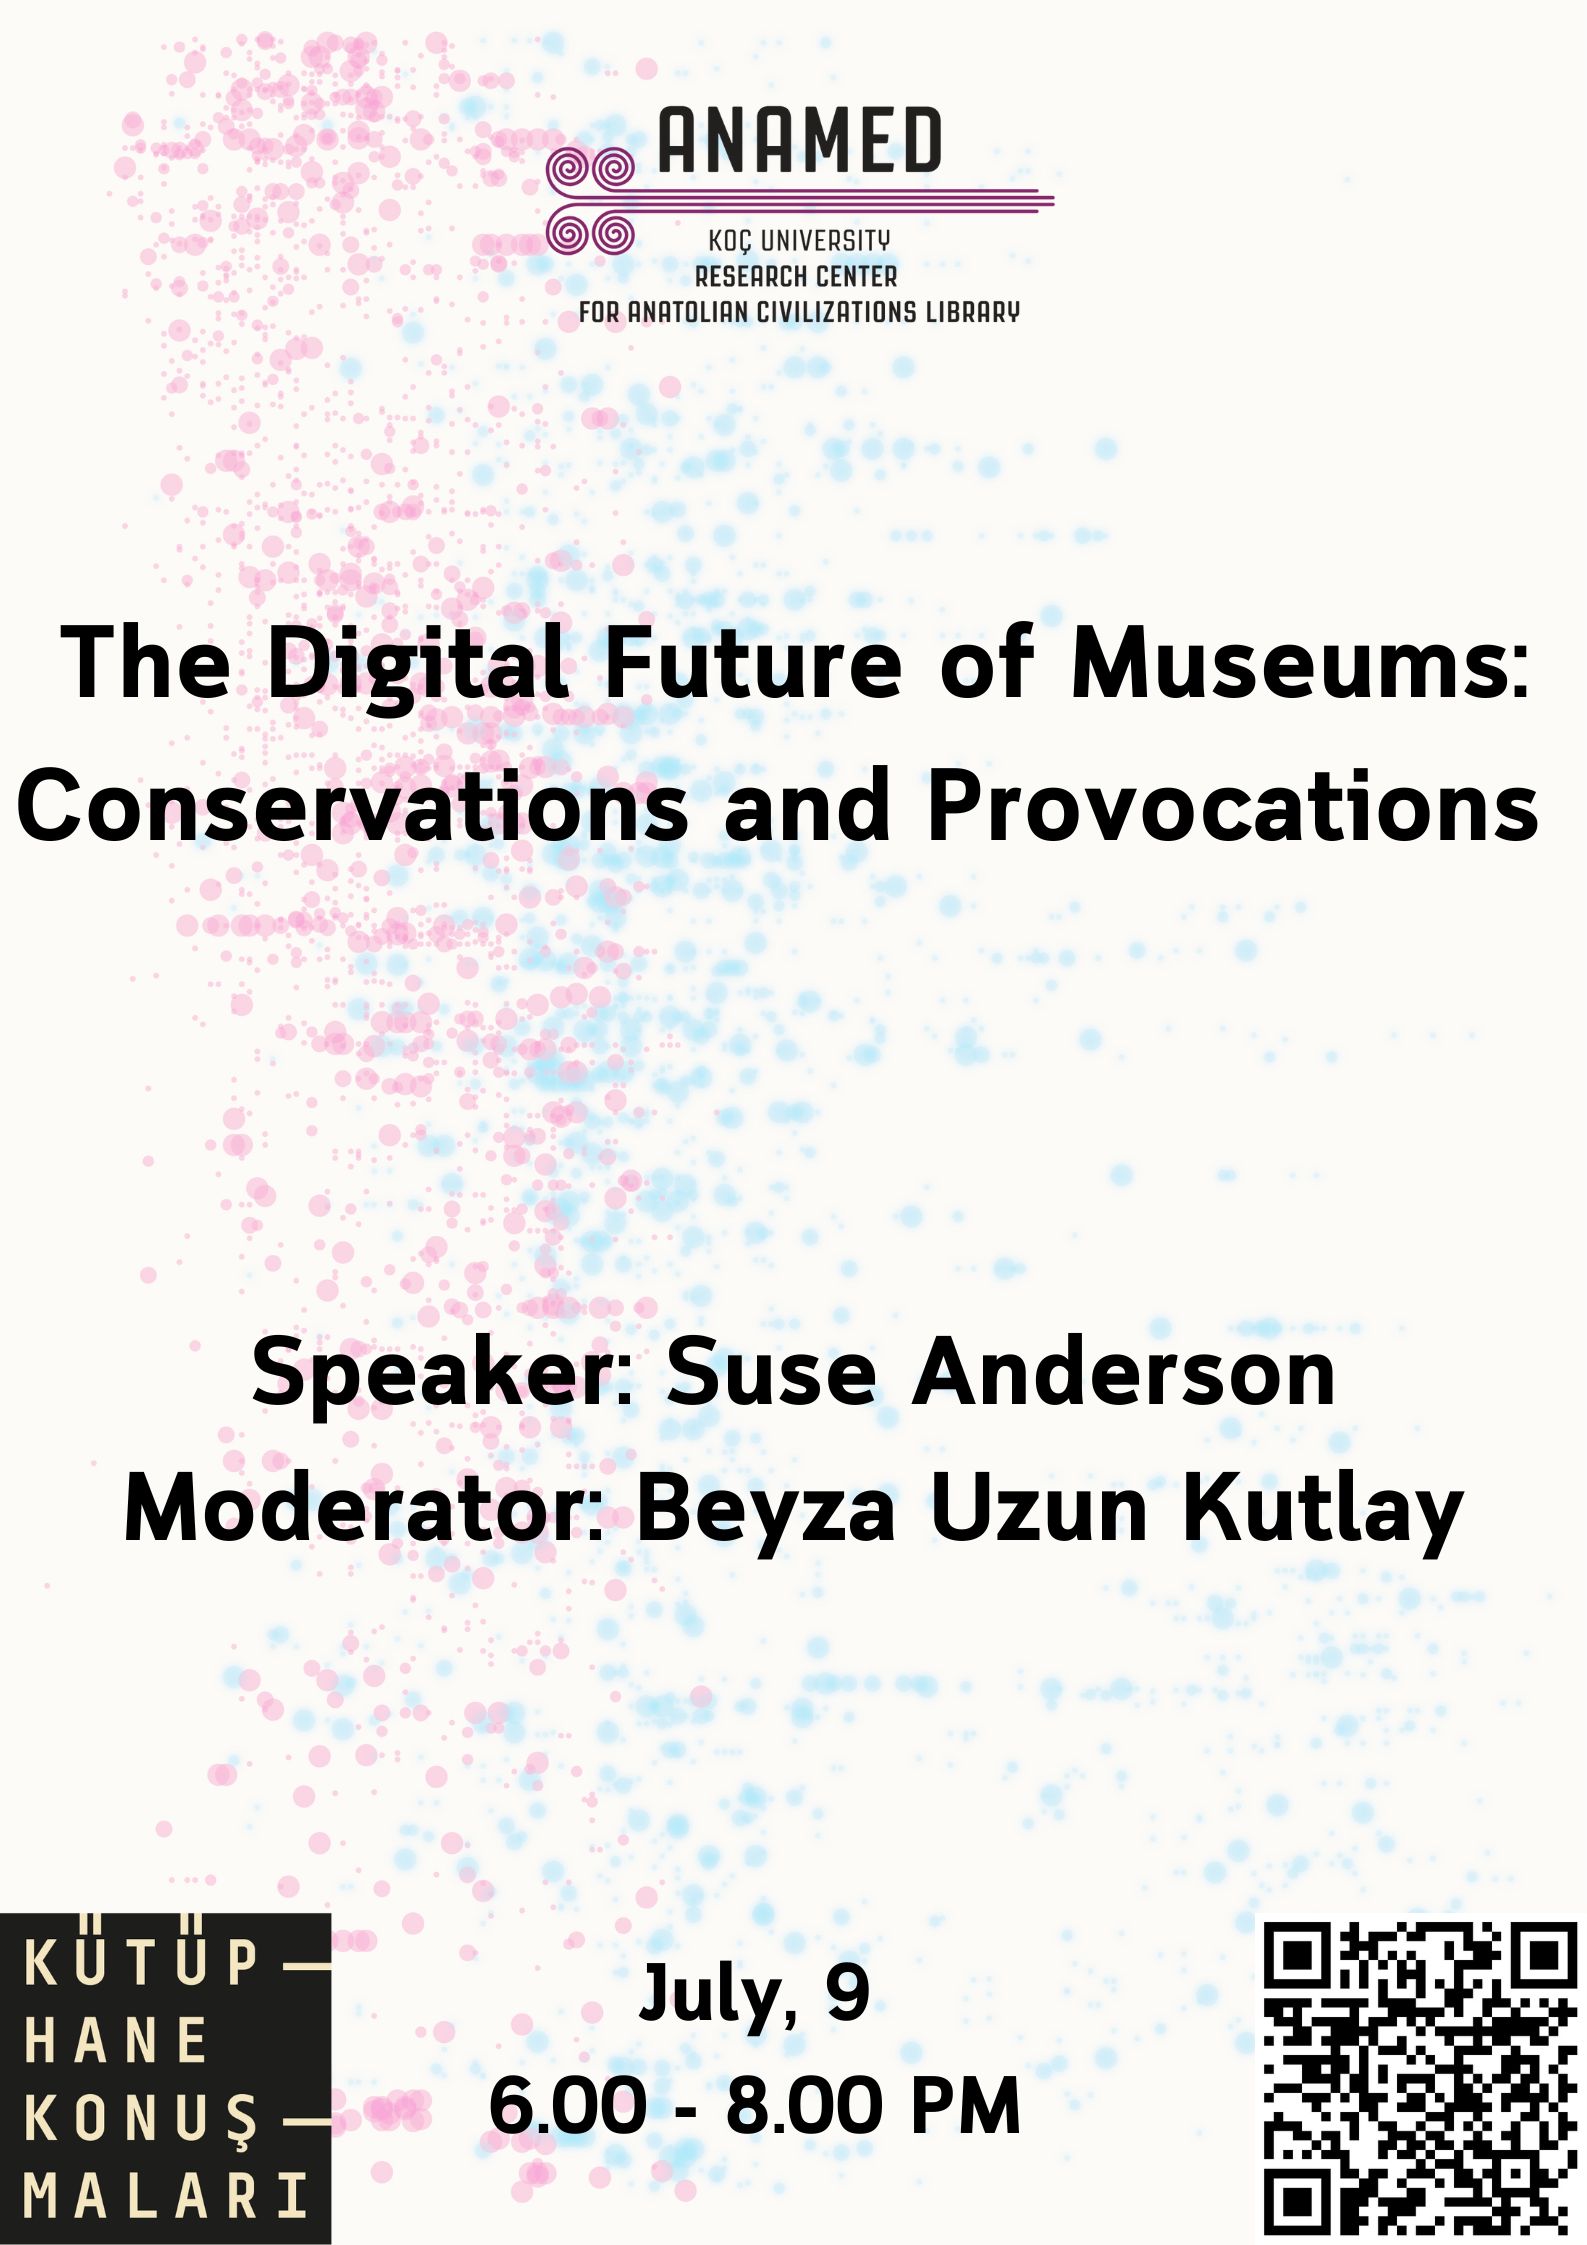 The Digital Future of Museums: Conservations and Provocations